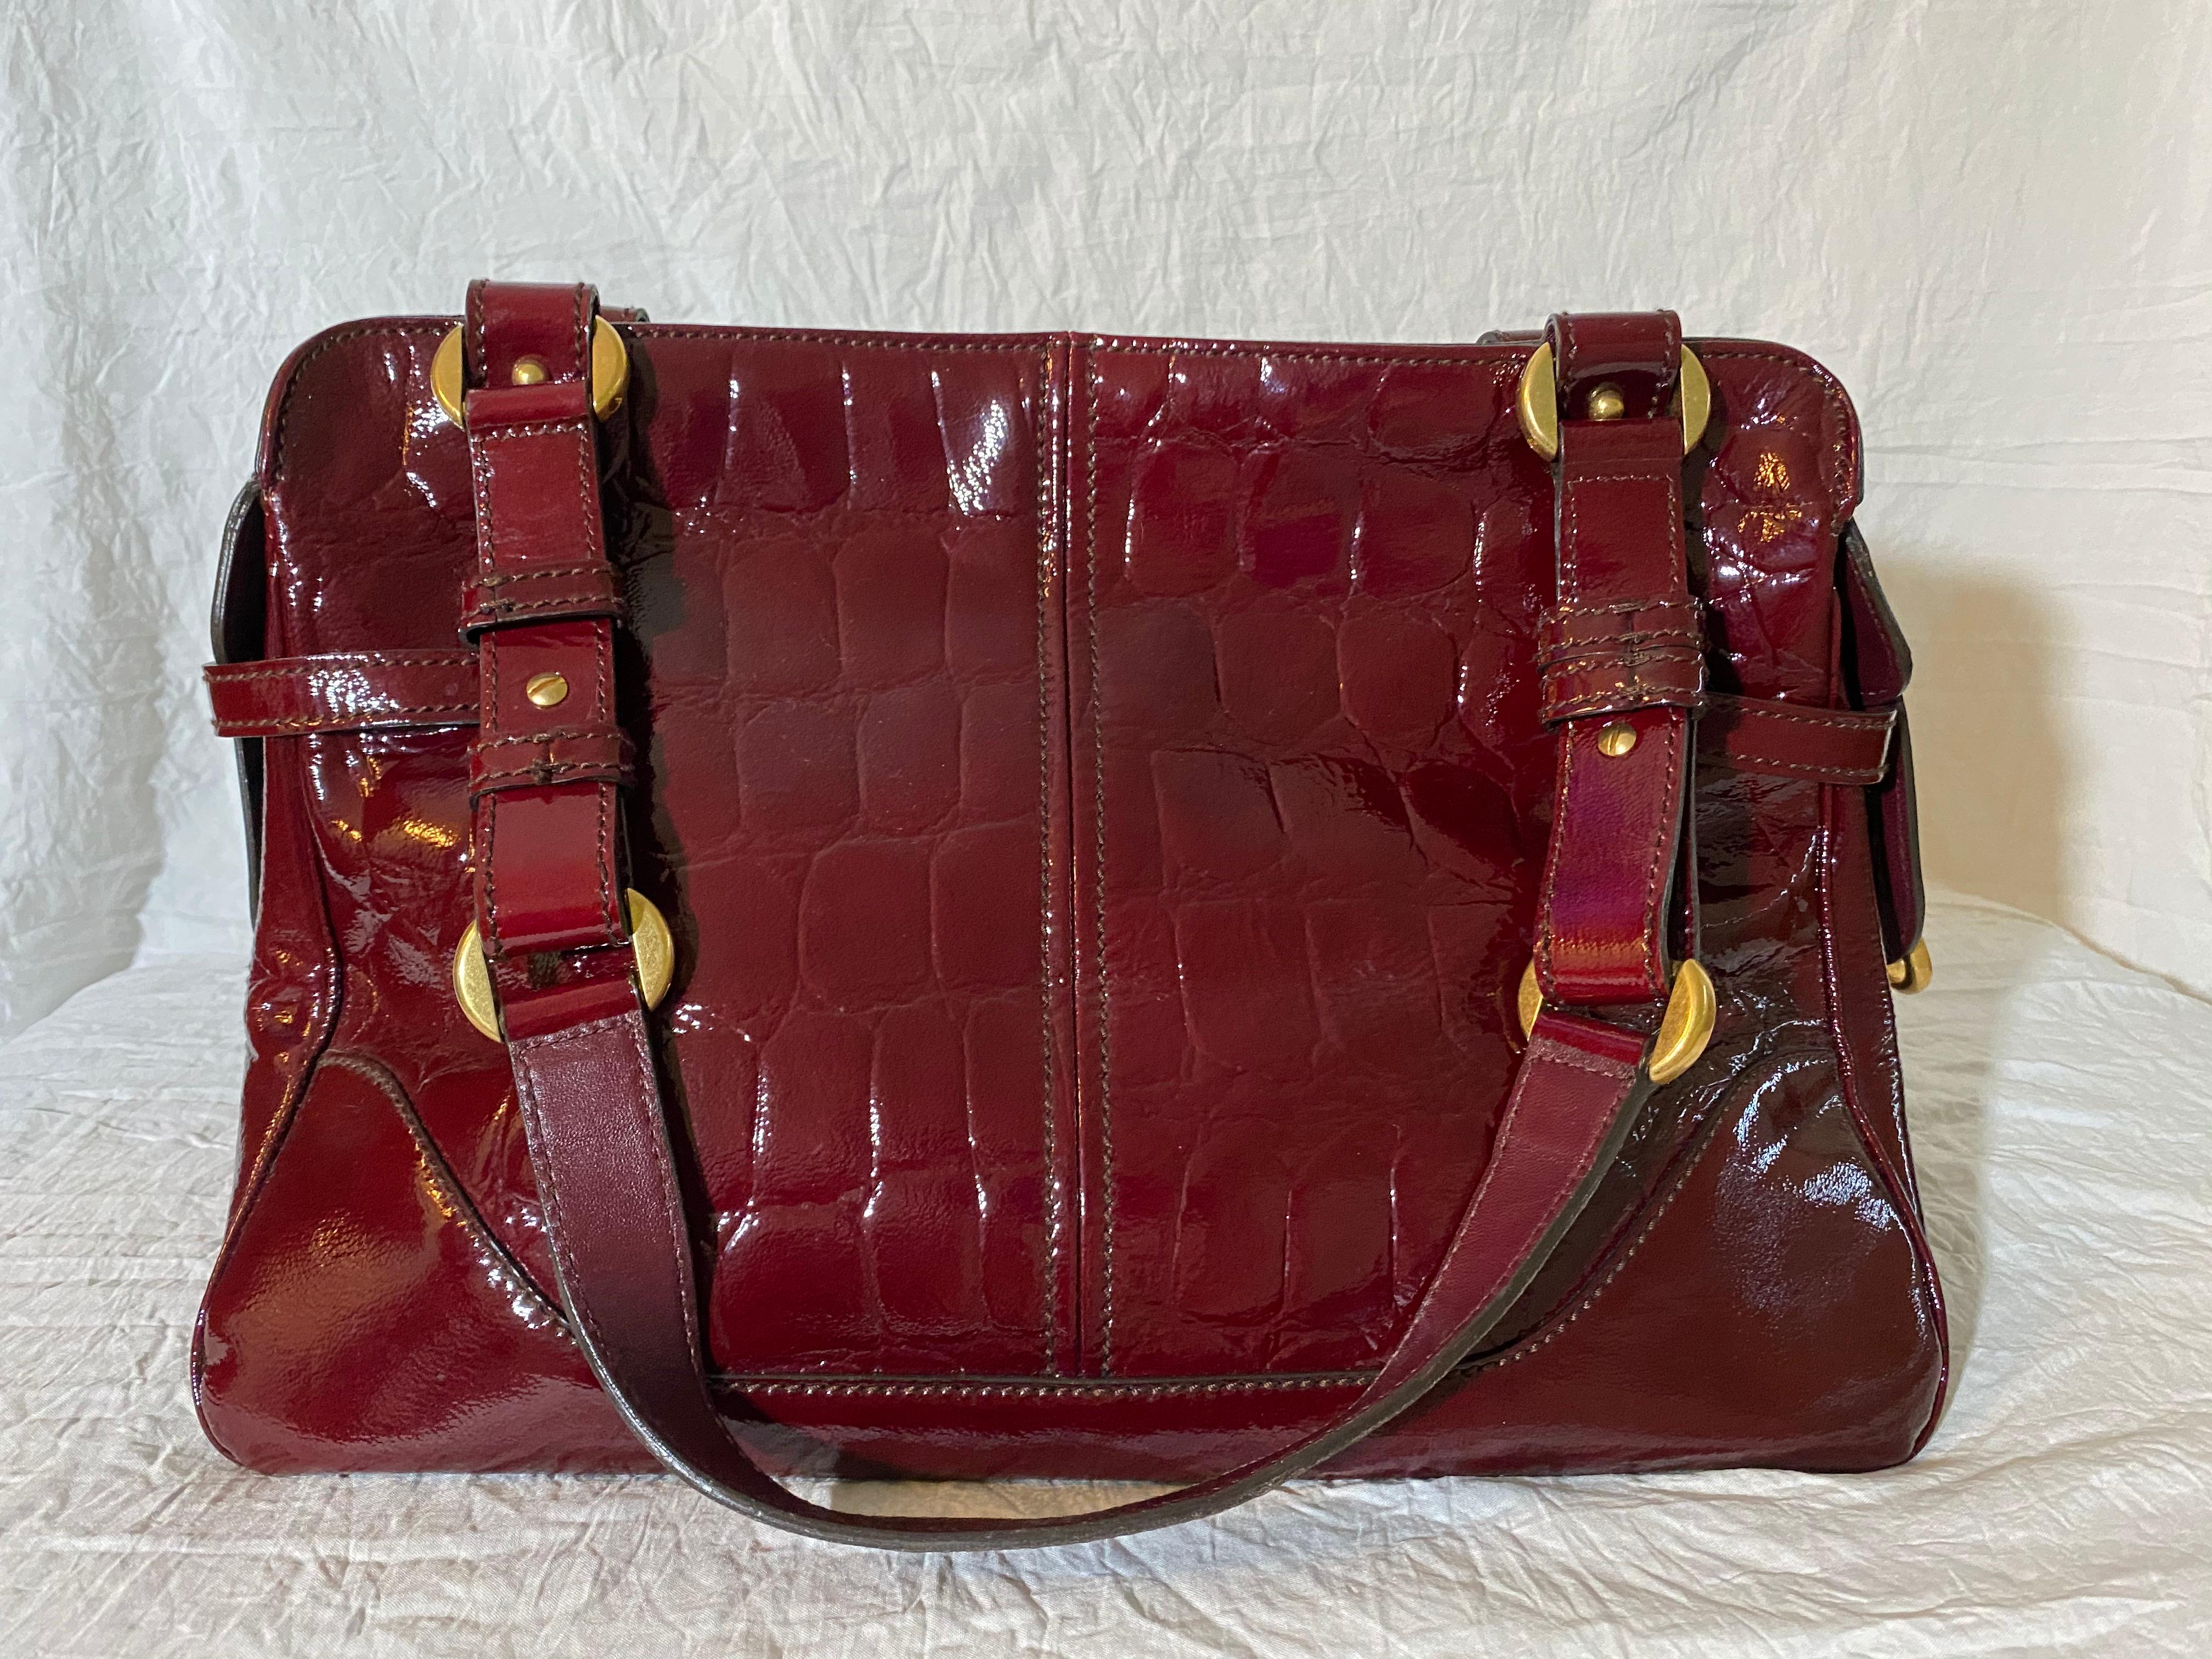 Patent crocodile leather, dusted gold-tone hardware and a fabric interior. 

Condition: Good used condition.
Exterior: Slight scuffing on hardware. 
Interior: Lined with fabric, one interior pocket.
Made In: Italy
Serial Number: 202659-204046
Dust